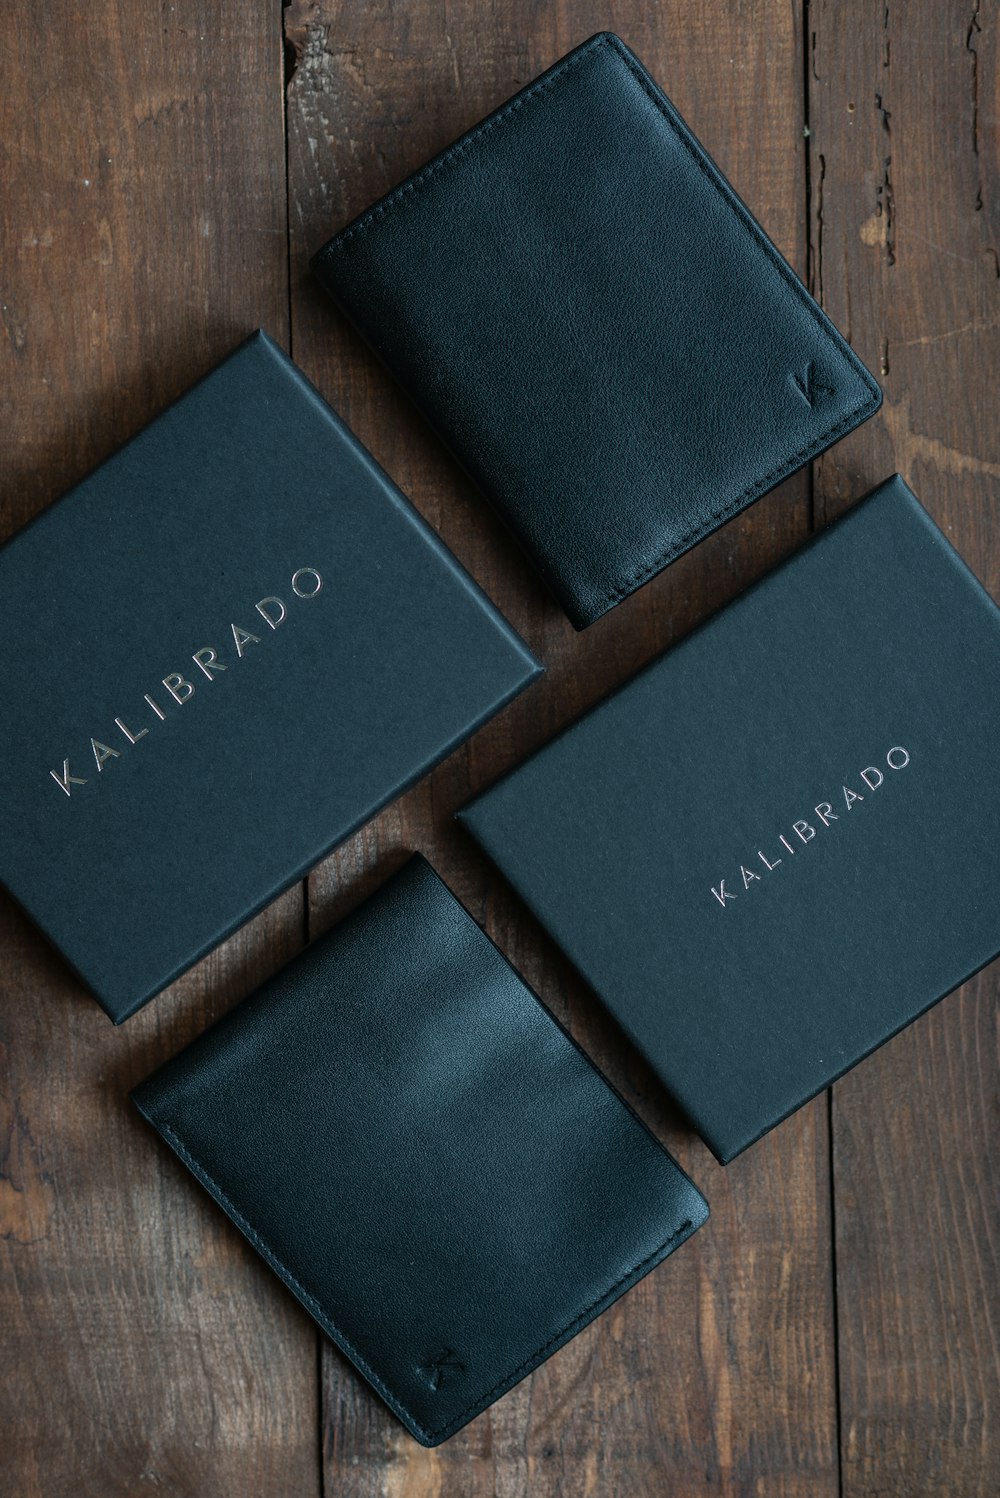 three black wallets sitting on top of a wooden table